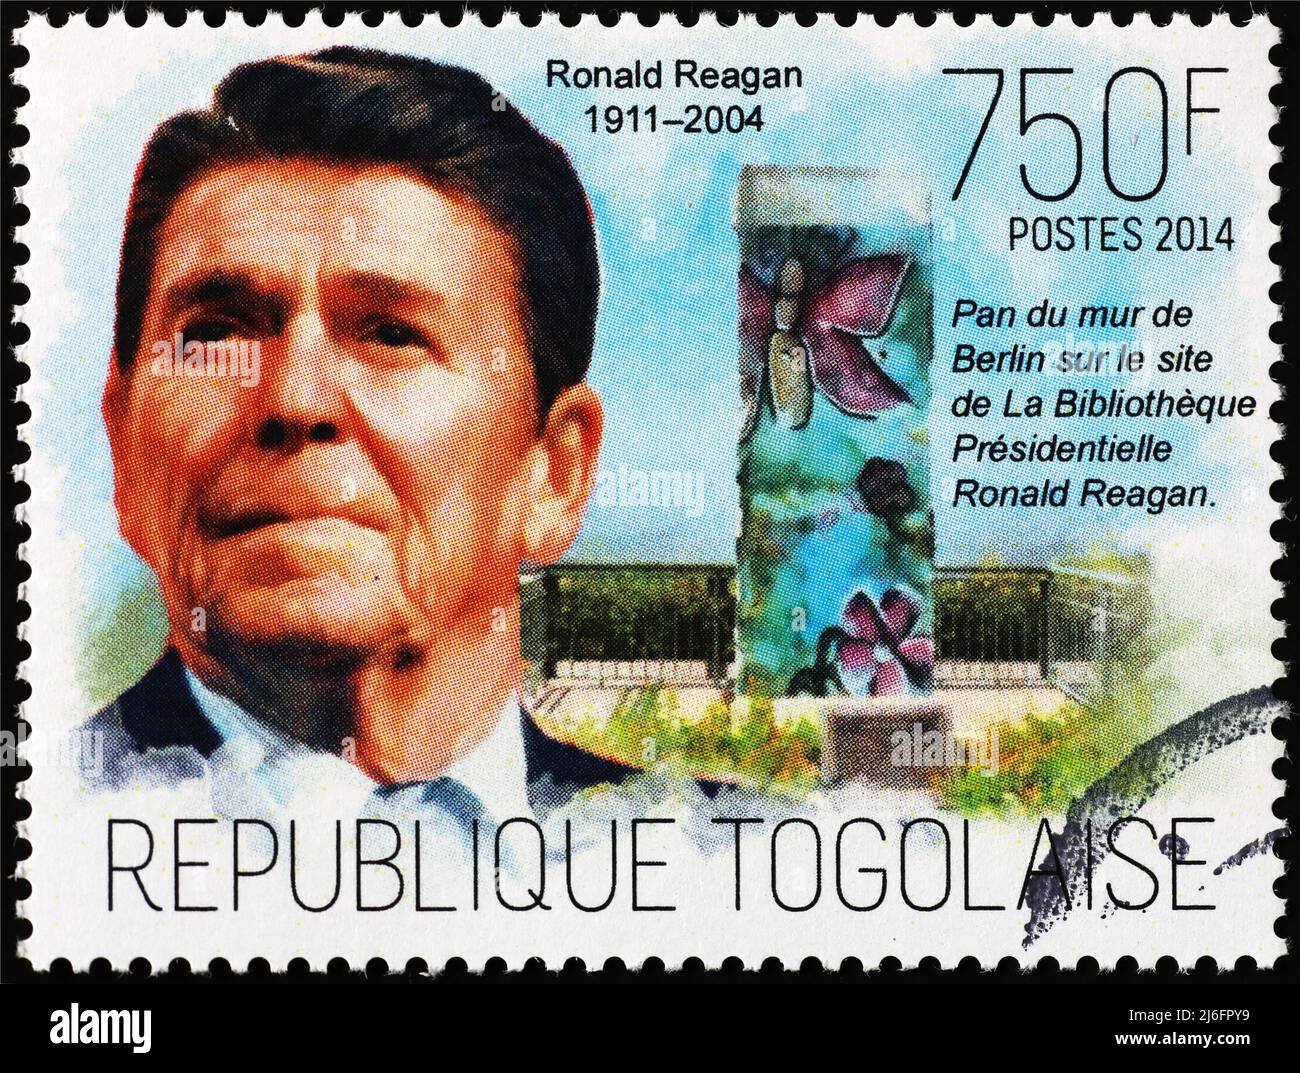 Ronald Reagan portrait on postage stamp from Togo Stock Photo